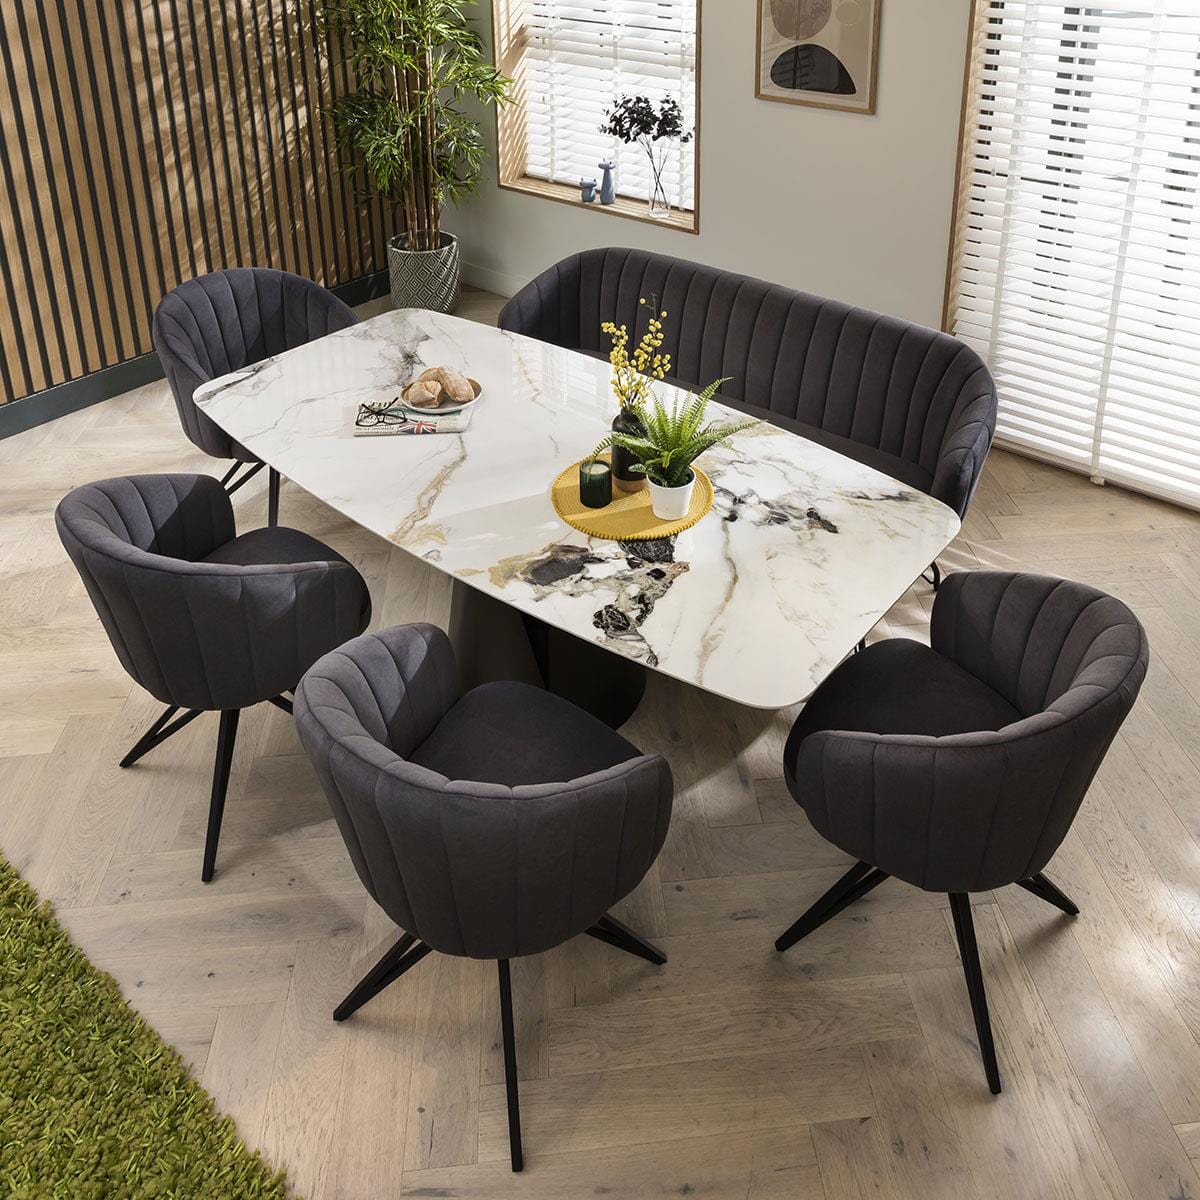 Quatropi 6 Seater Modern Bench Dining Set With Grey Chairs - Ceramic Marble Dining Table